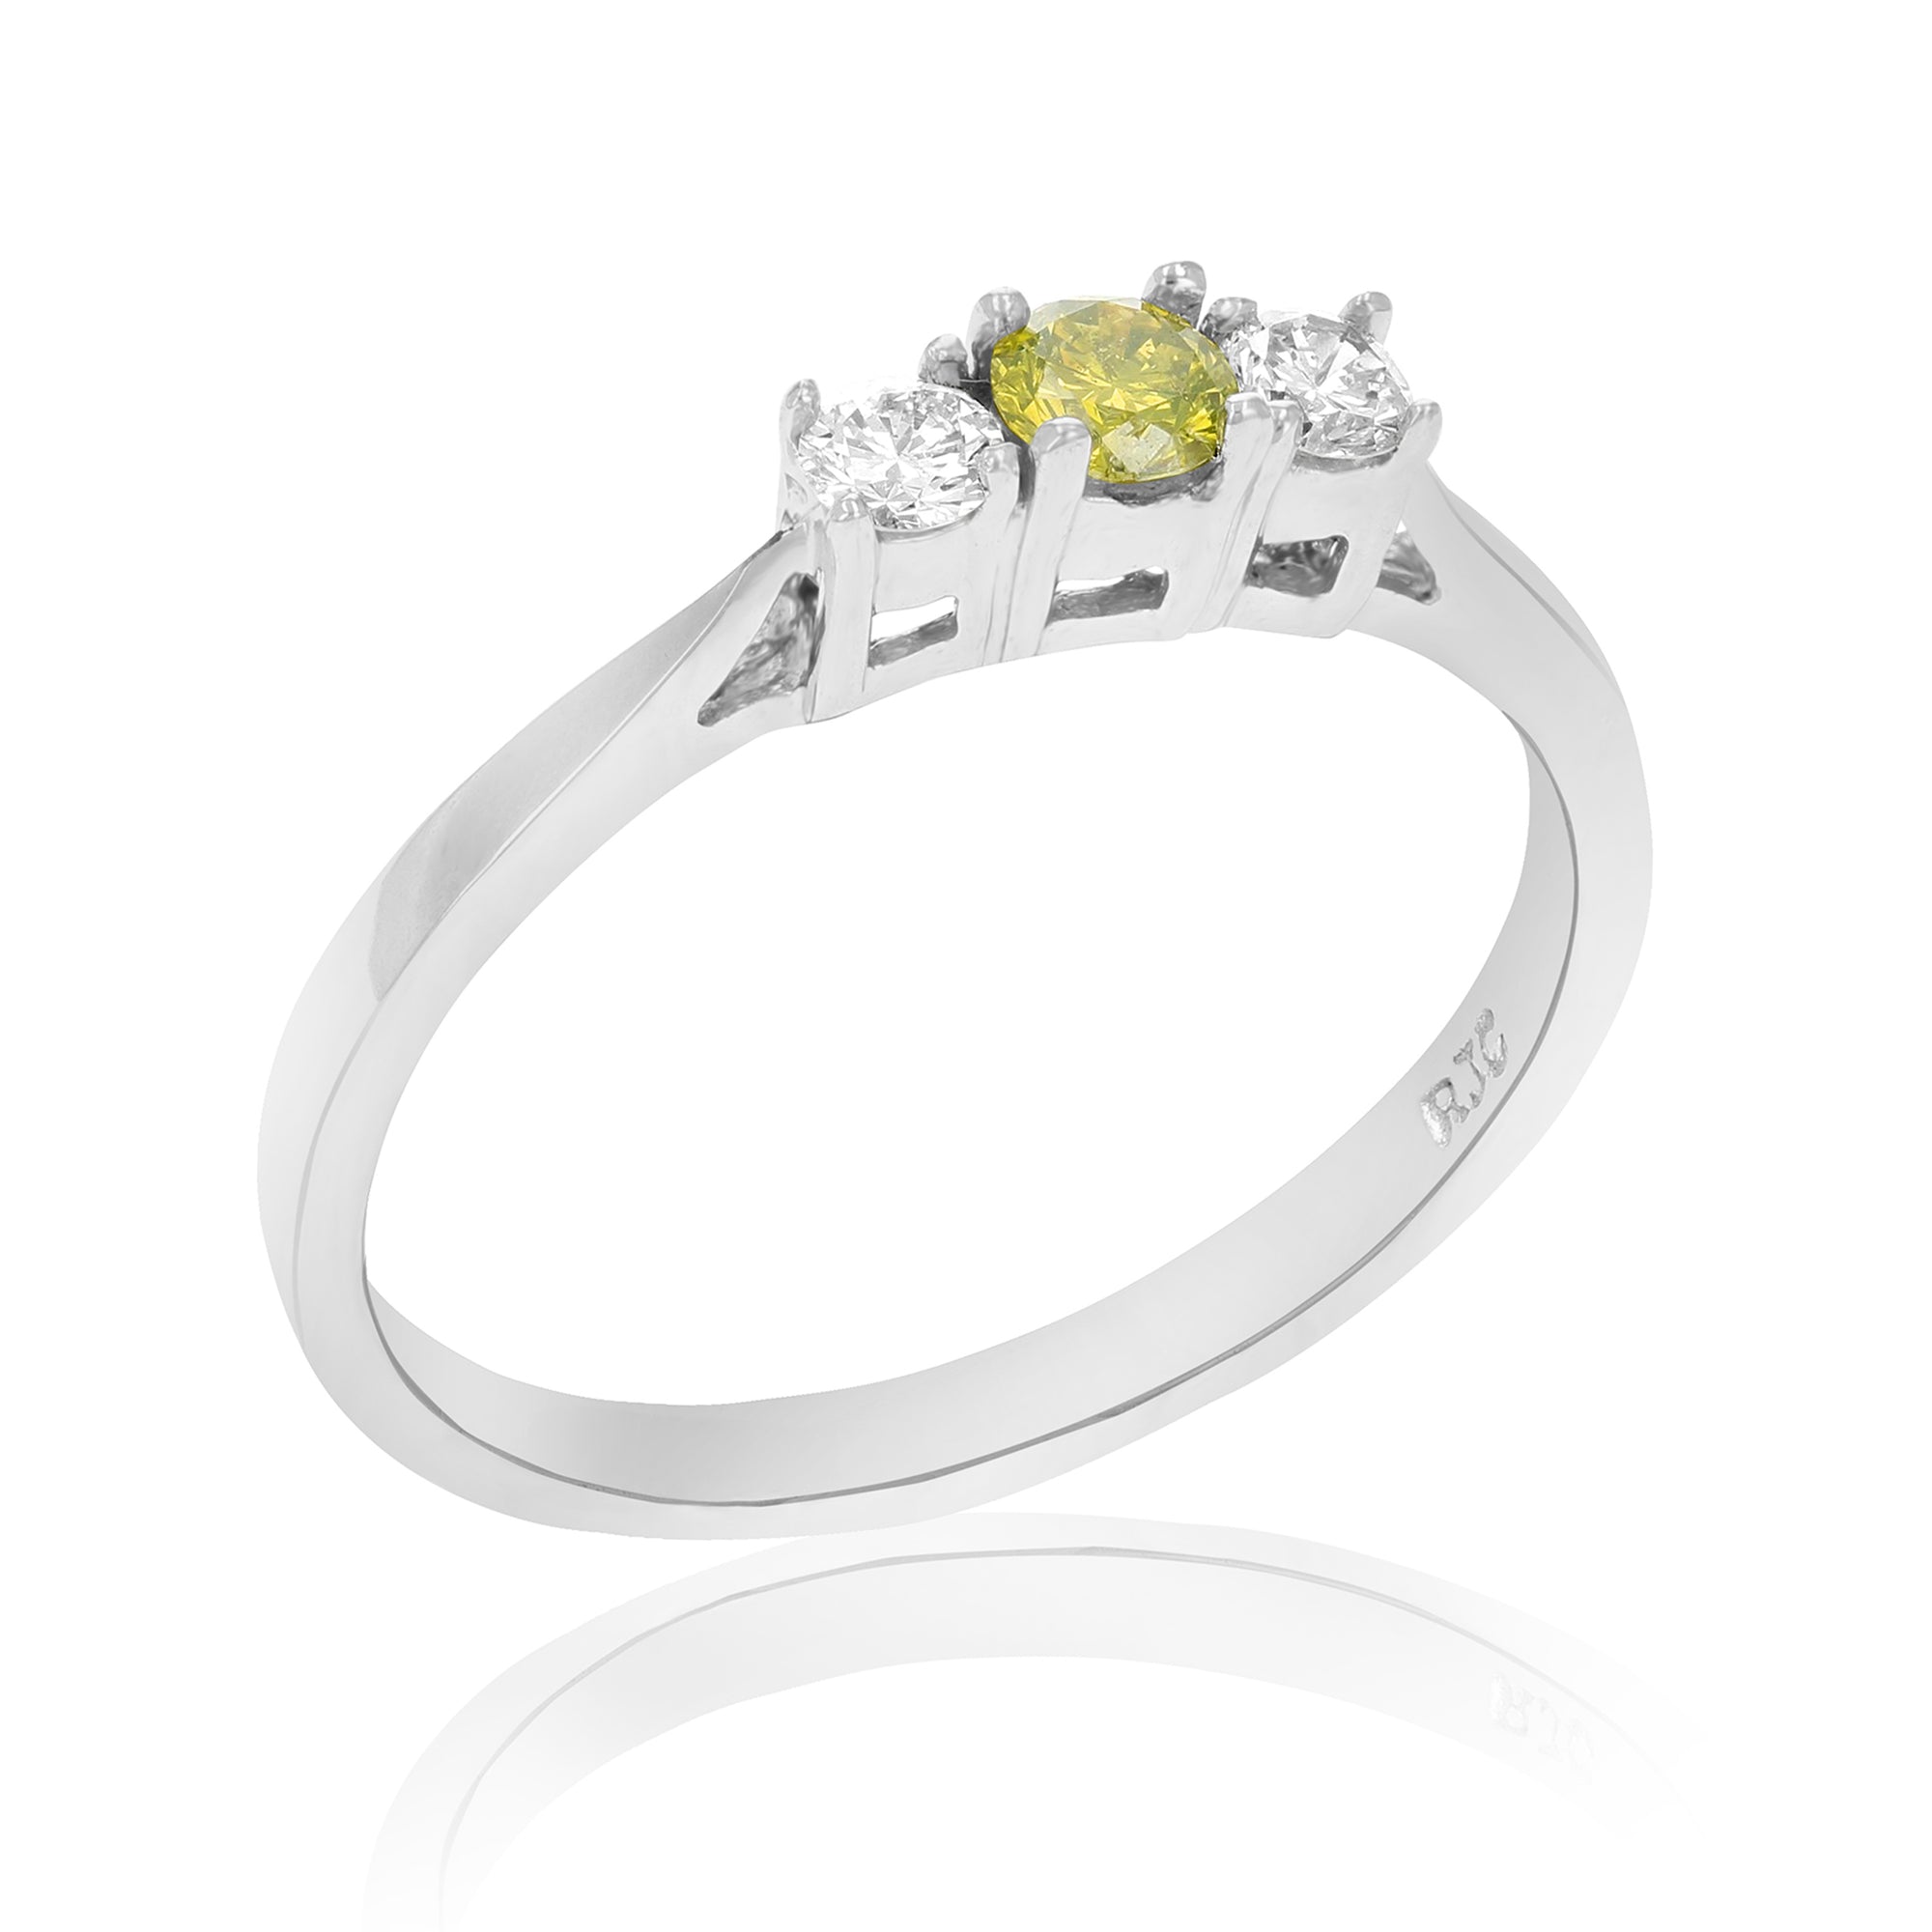 1/4 cttw Yellow and White Diamond 3 Stone Ring in .925 Sterling Silver Size 7